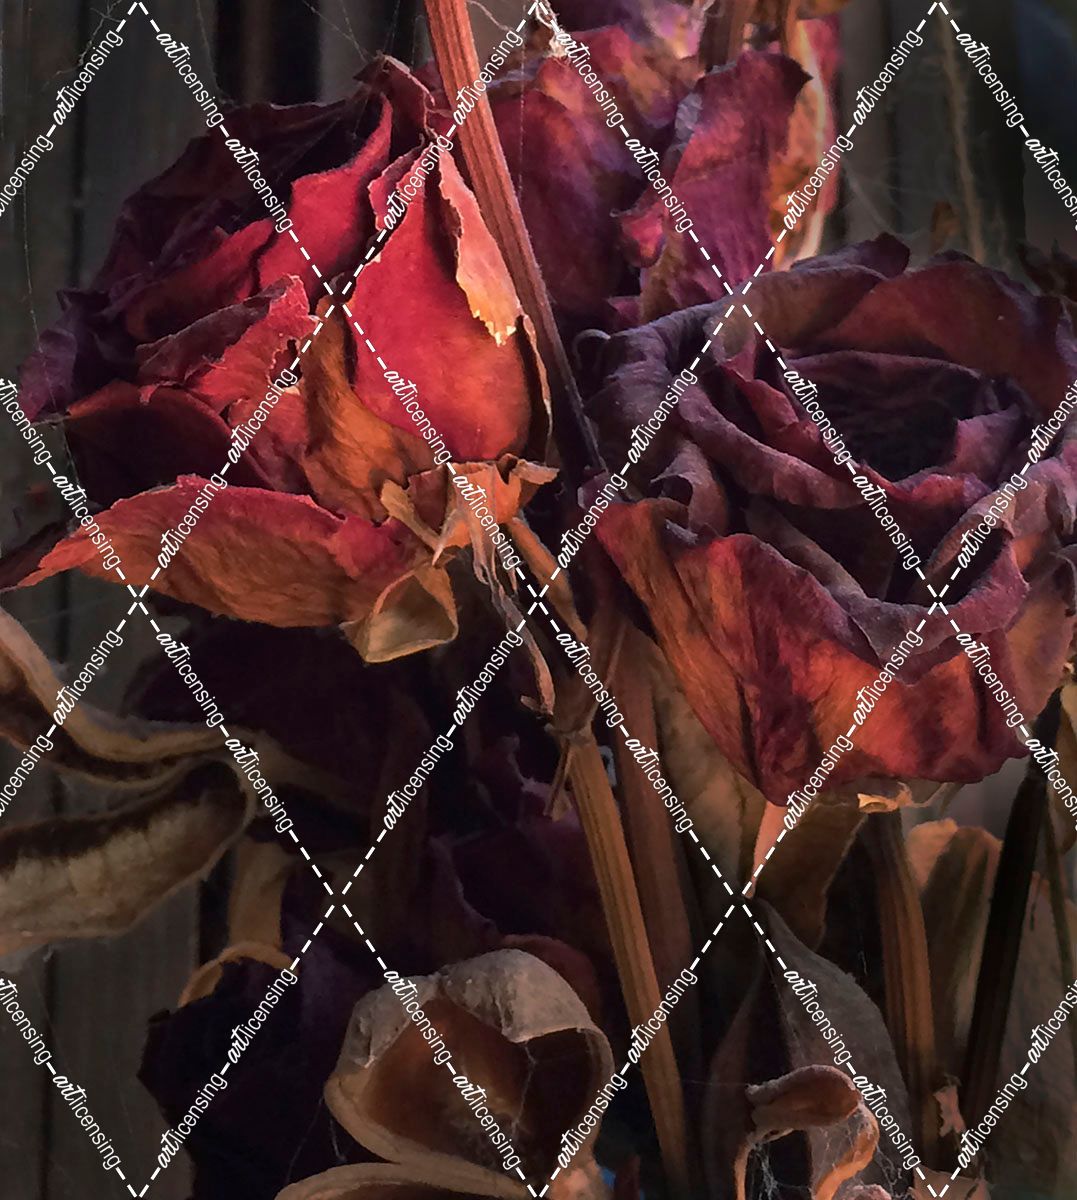 Faded Roses